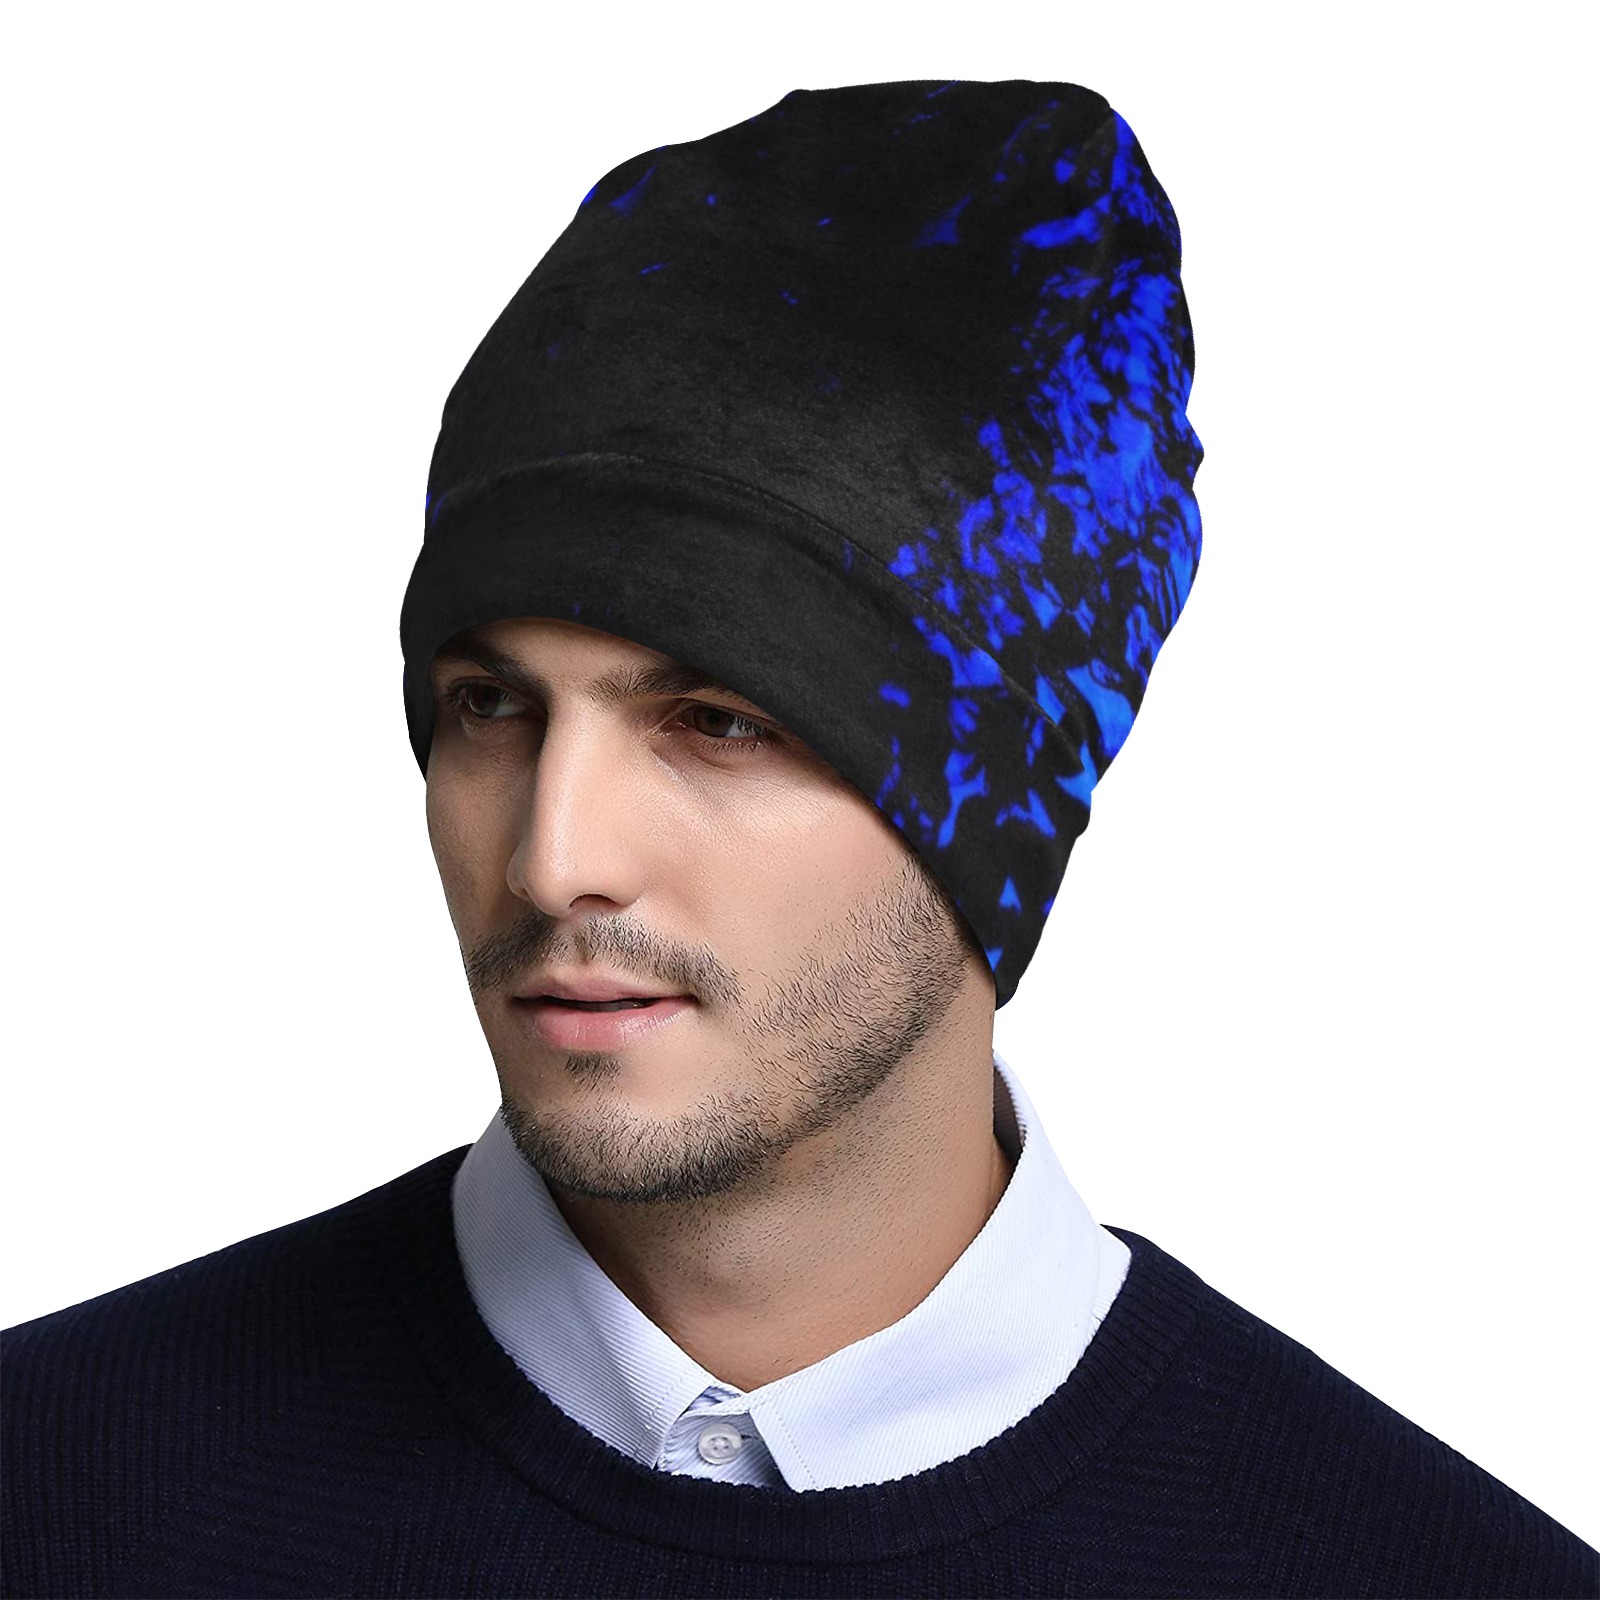 roots new All Over Print Beanie for Adults